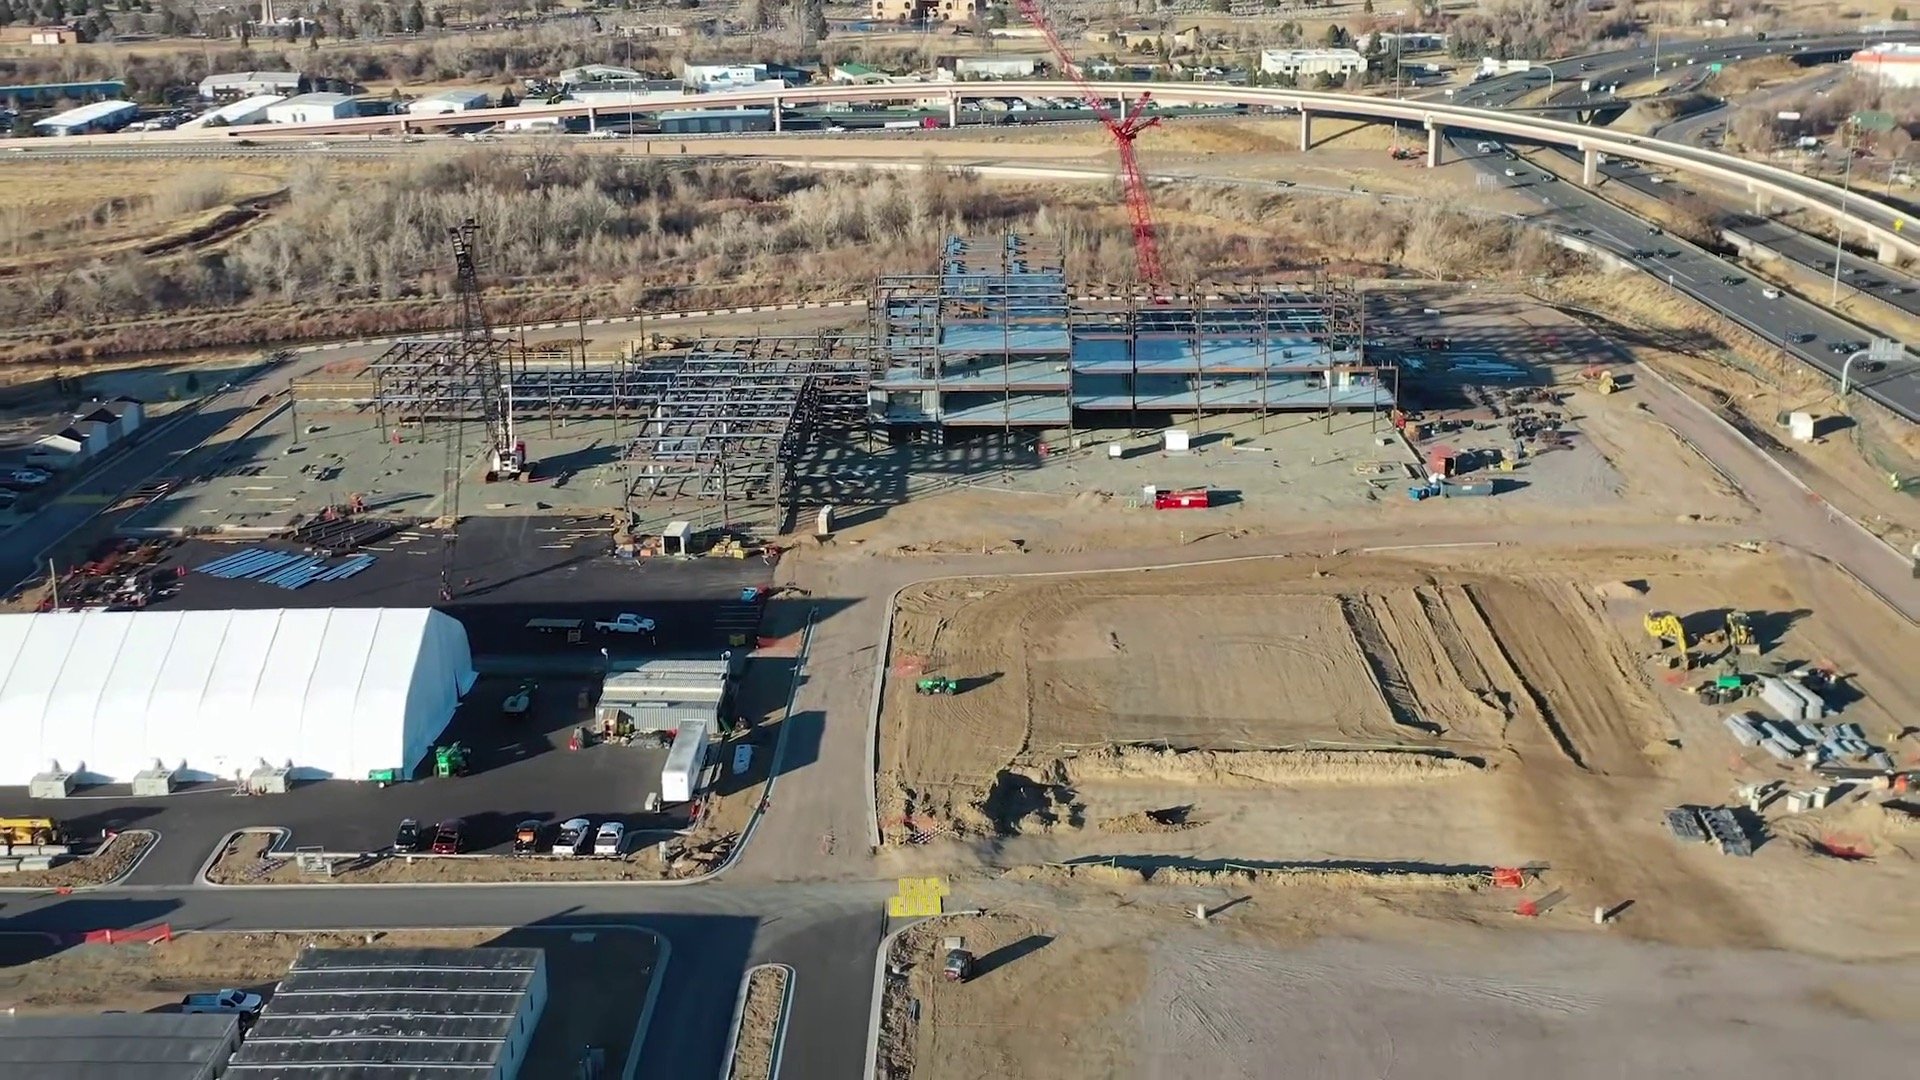 Construction-Entrance-Trackout-Control-Construction-Exit-BMP-VTP-Vehicle-Tracking-Pad-Reusable-Construction-Entrance-Trackout-Control-Mat-System-Installed-At-SCL-Health-Intermountain-Health-20.jpeg